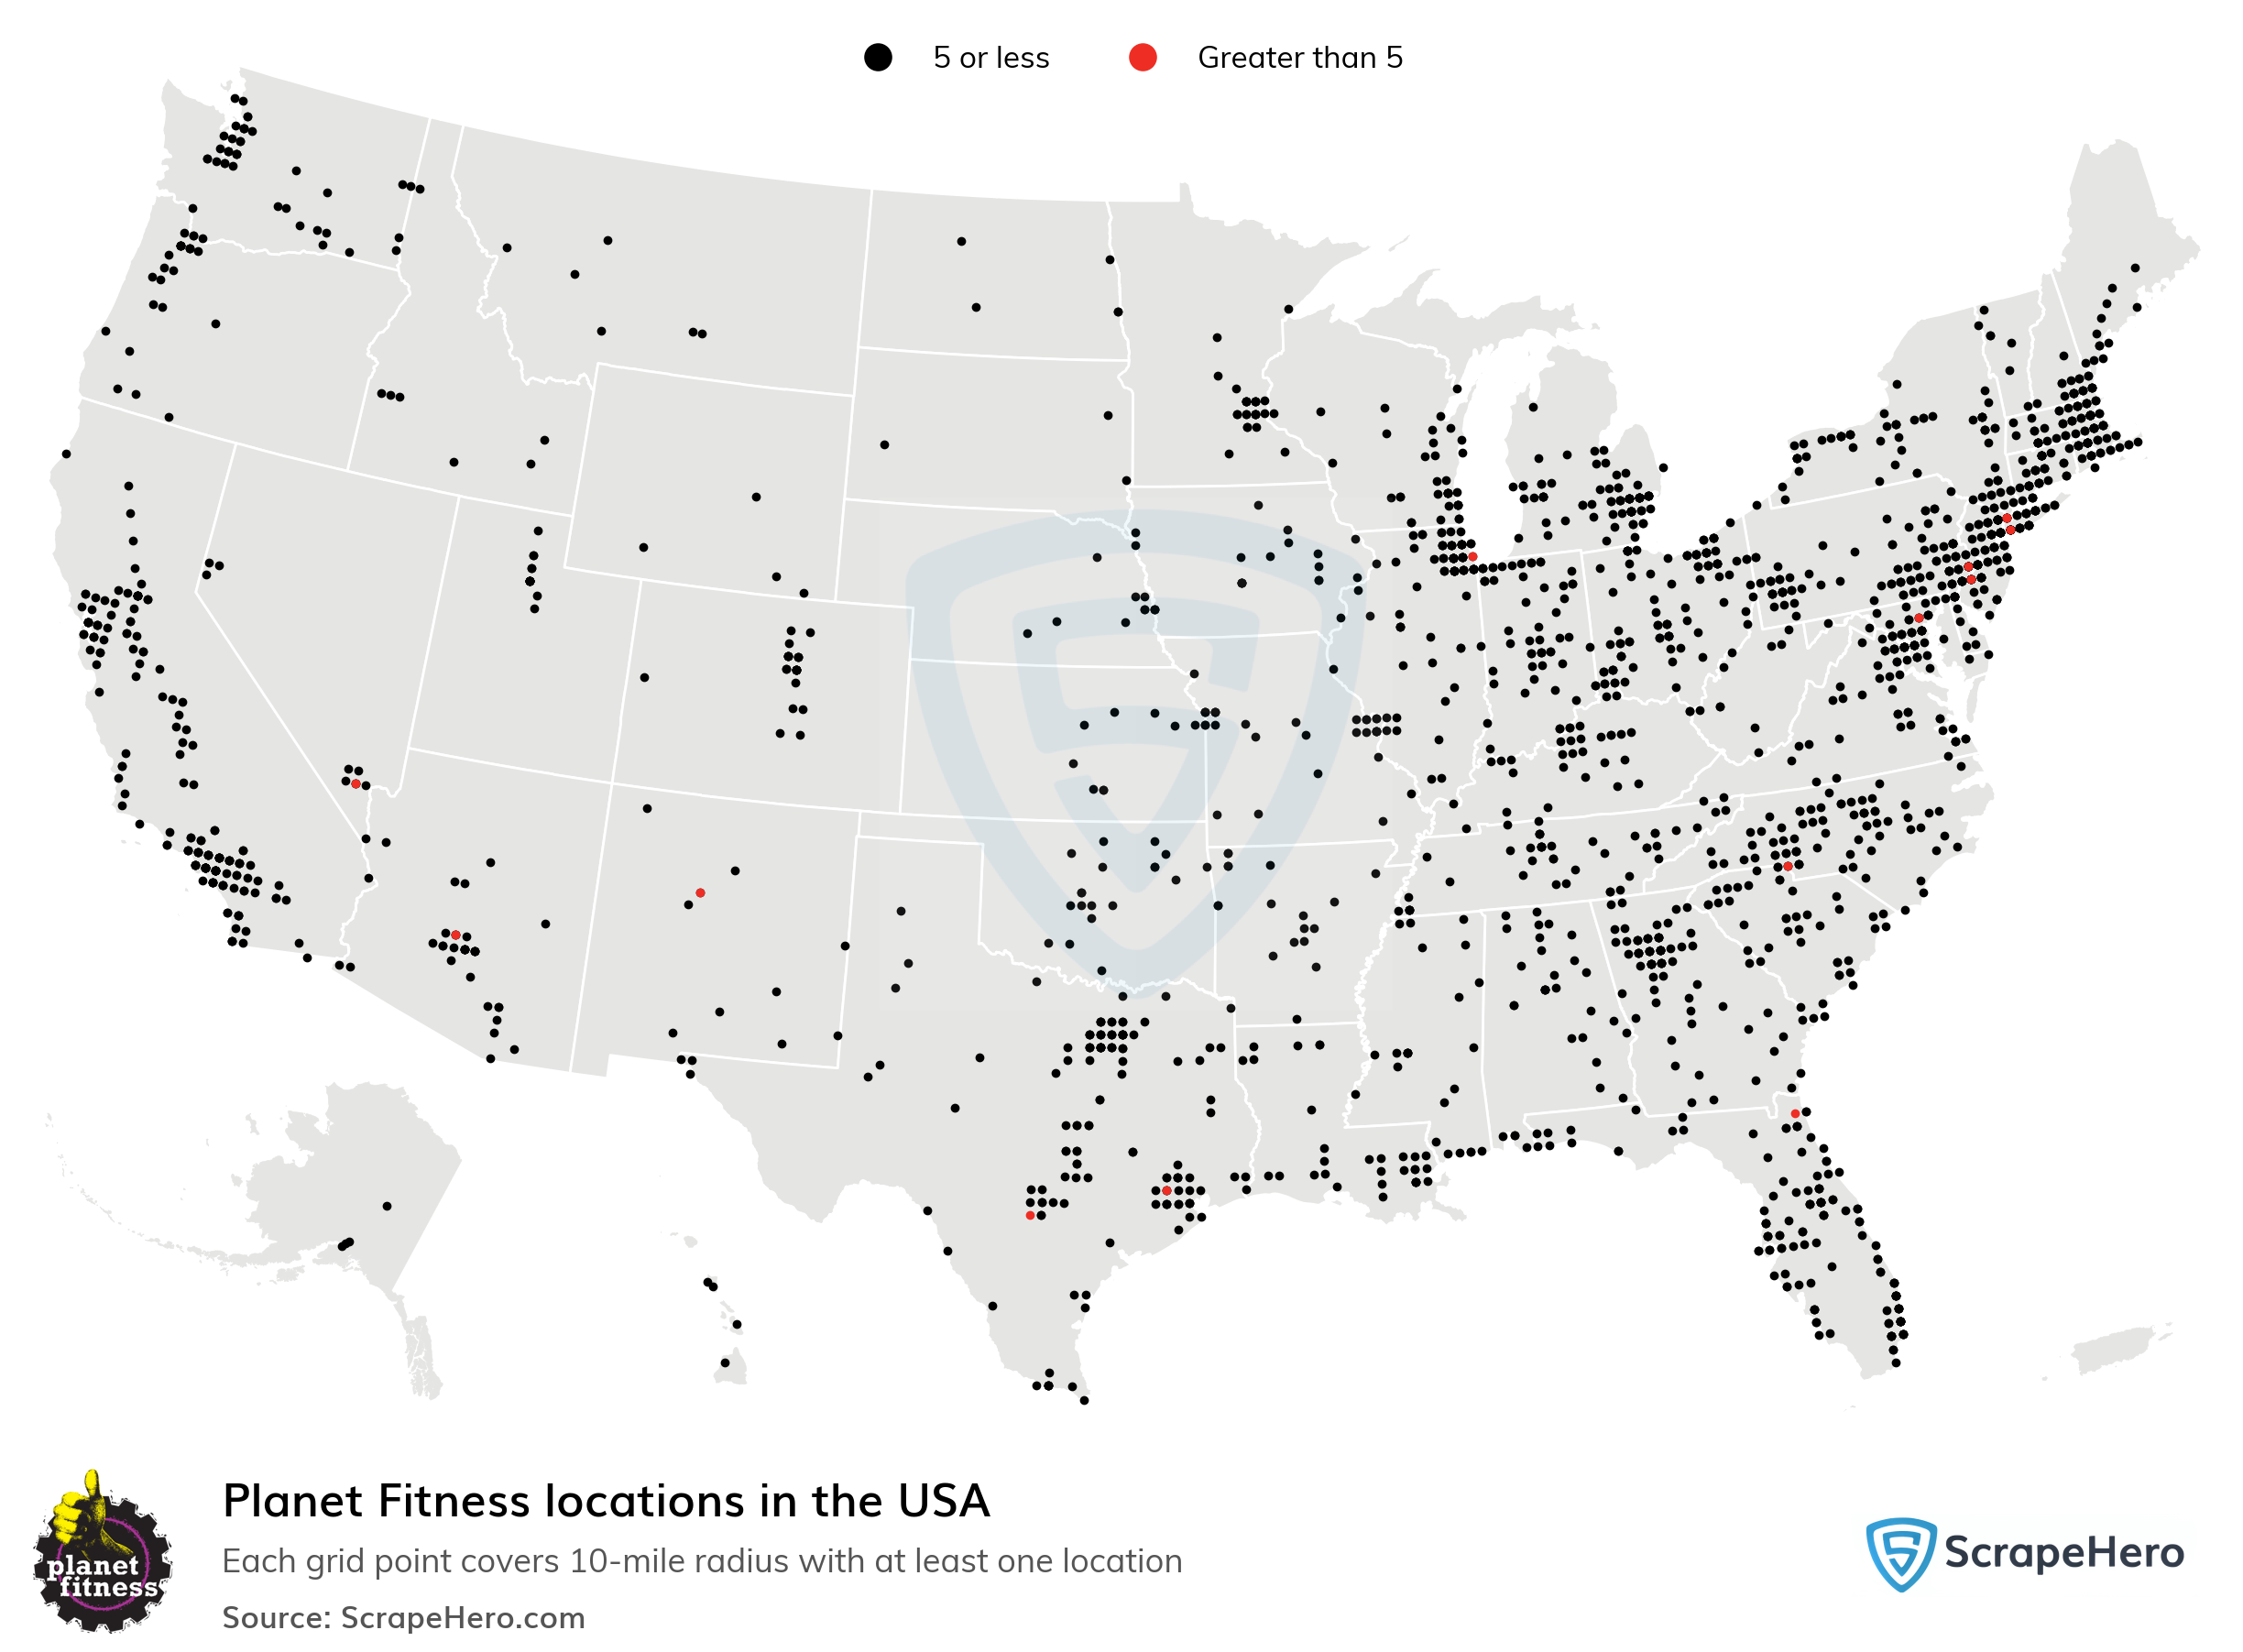 Planet Fitness locations in the USA